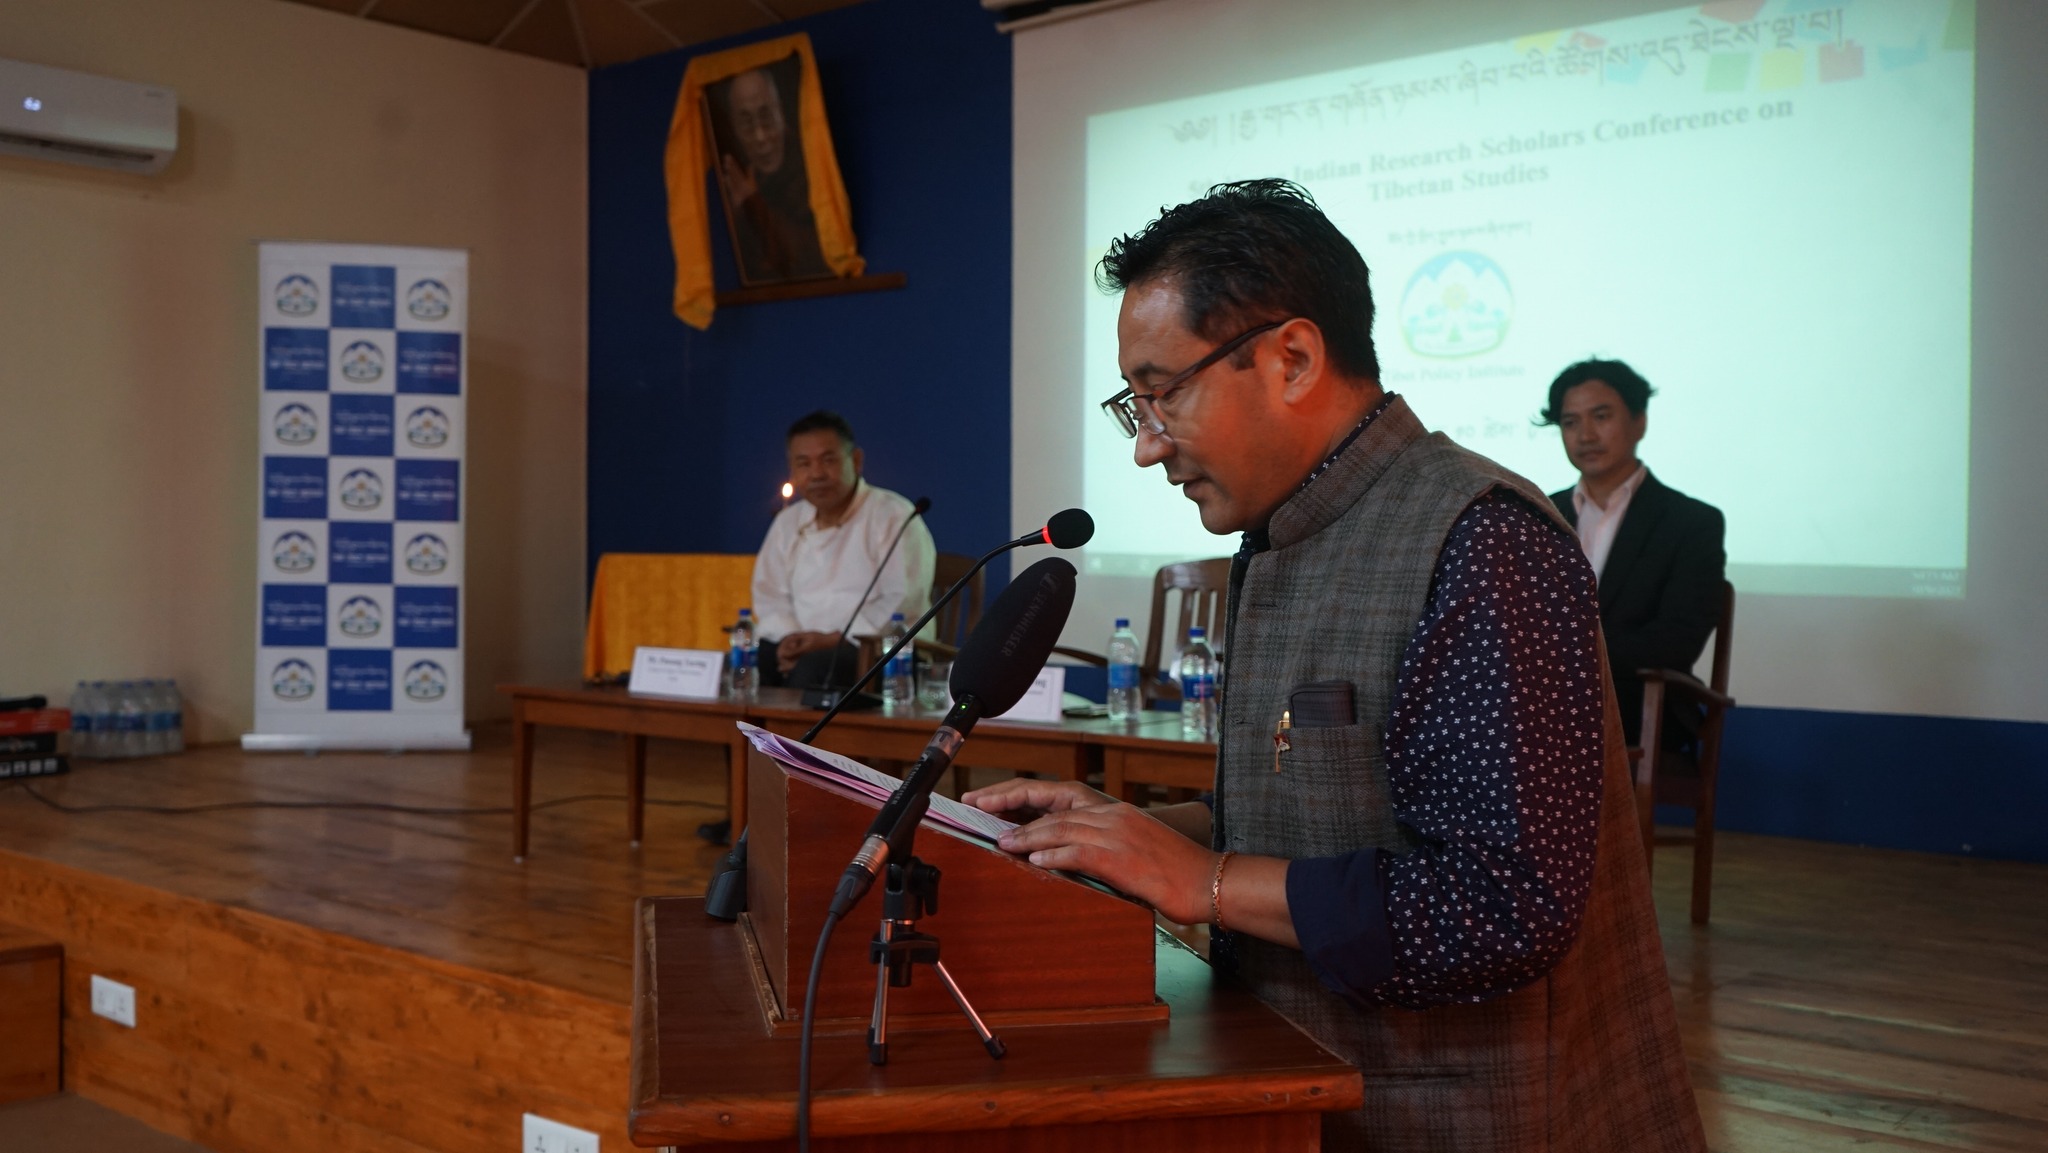 Mr. Karma Choeying, Secretary of the Department of Information and International Relations, CTA, and chief guest of the conference gave his keynote address highlighting the importance of culture, geopolitics, and environment of Tibet and the increasing geopolitics and geostrategic importance of Tibet and the Himalayas in India-China relations